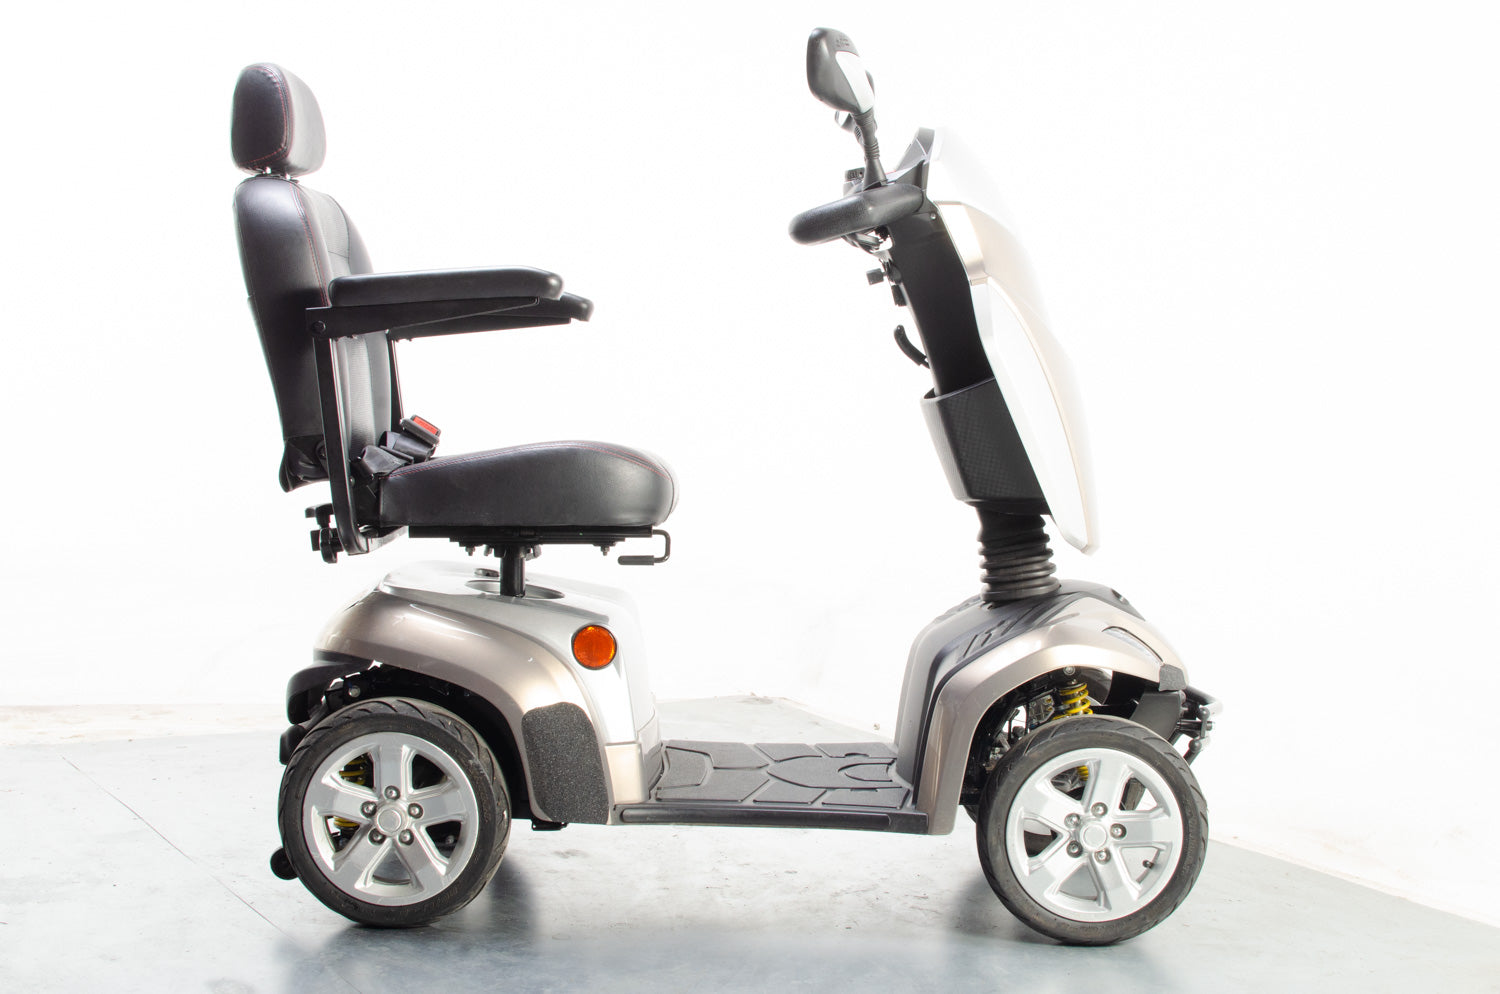 2016 Kymco Agility 8mph Mid Size Luxury Road Legal Mobility Scooter in Metallic Mink